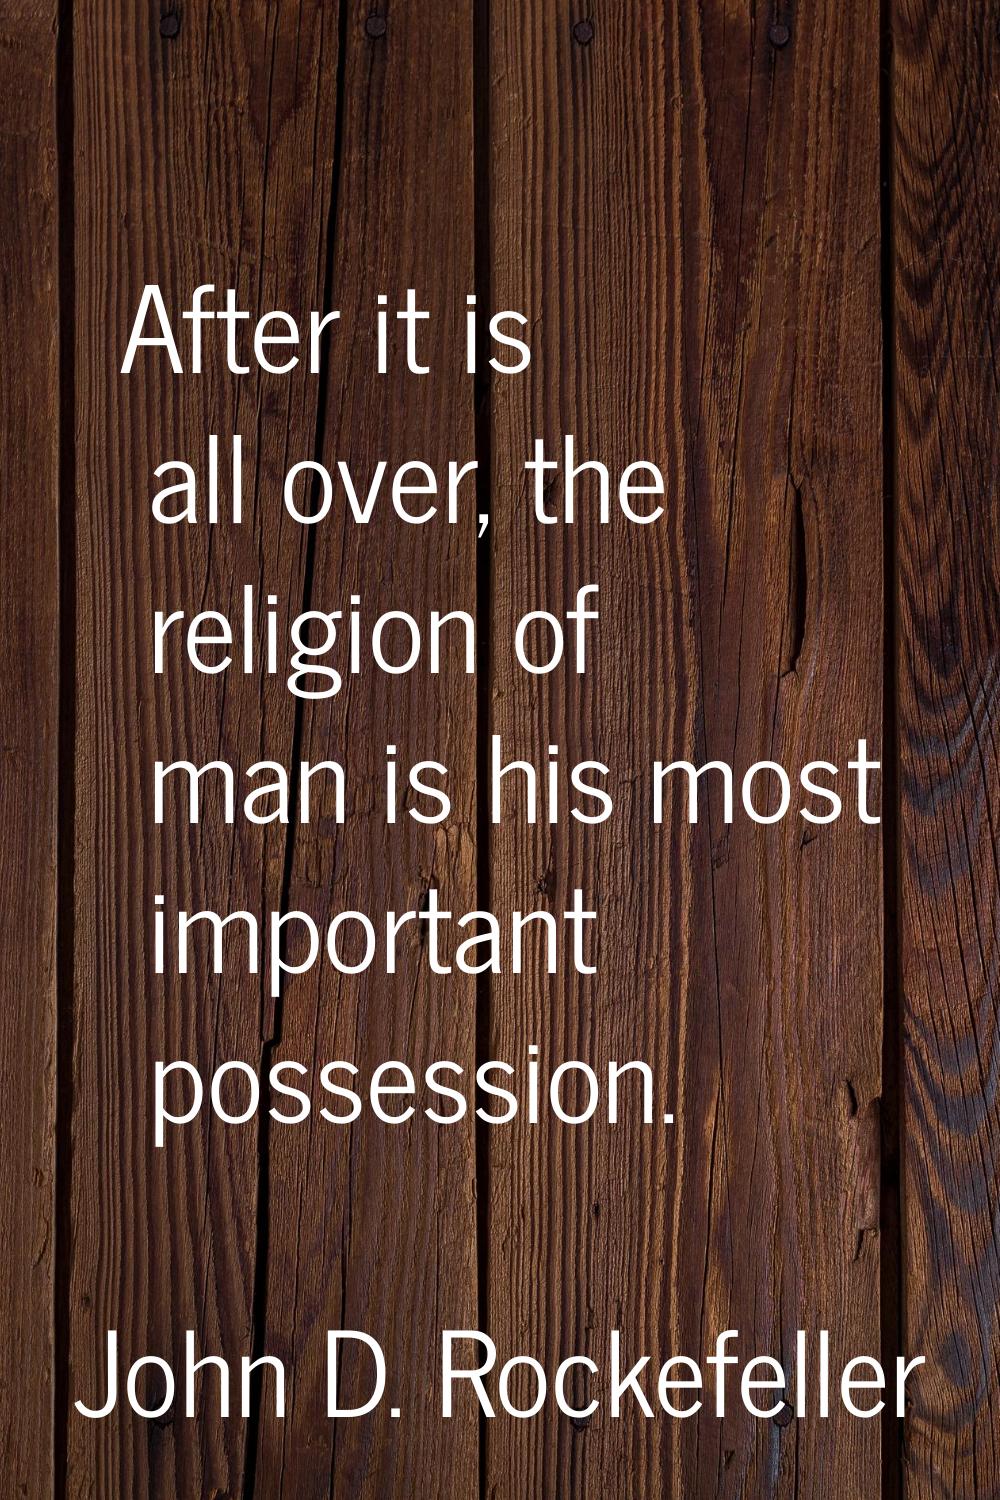 After it is all over, the religion of man is his most important possession.